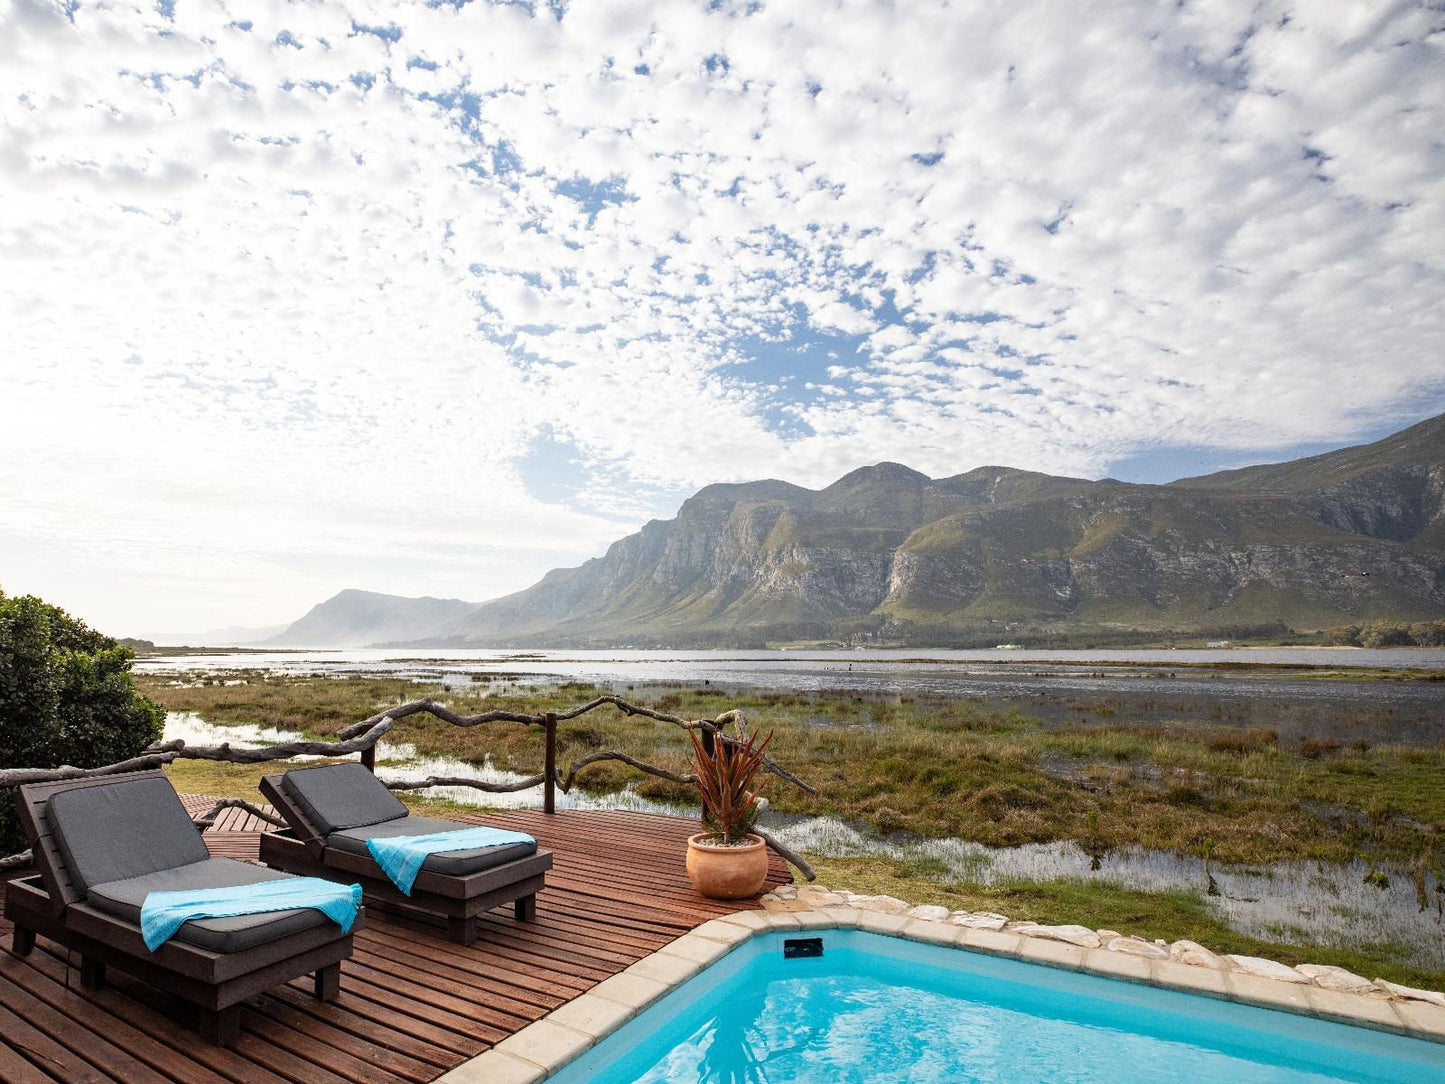 Mosaic Lagoon Lodge Stanford Western Cape South Africa Beach, Nature, Sand, Mountain, Swimming Pool